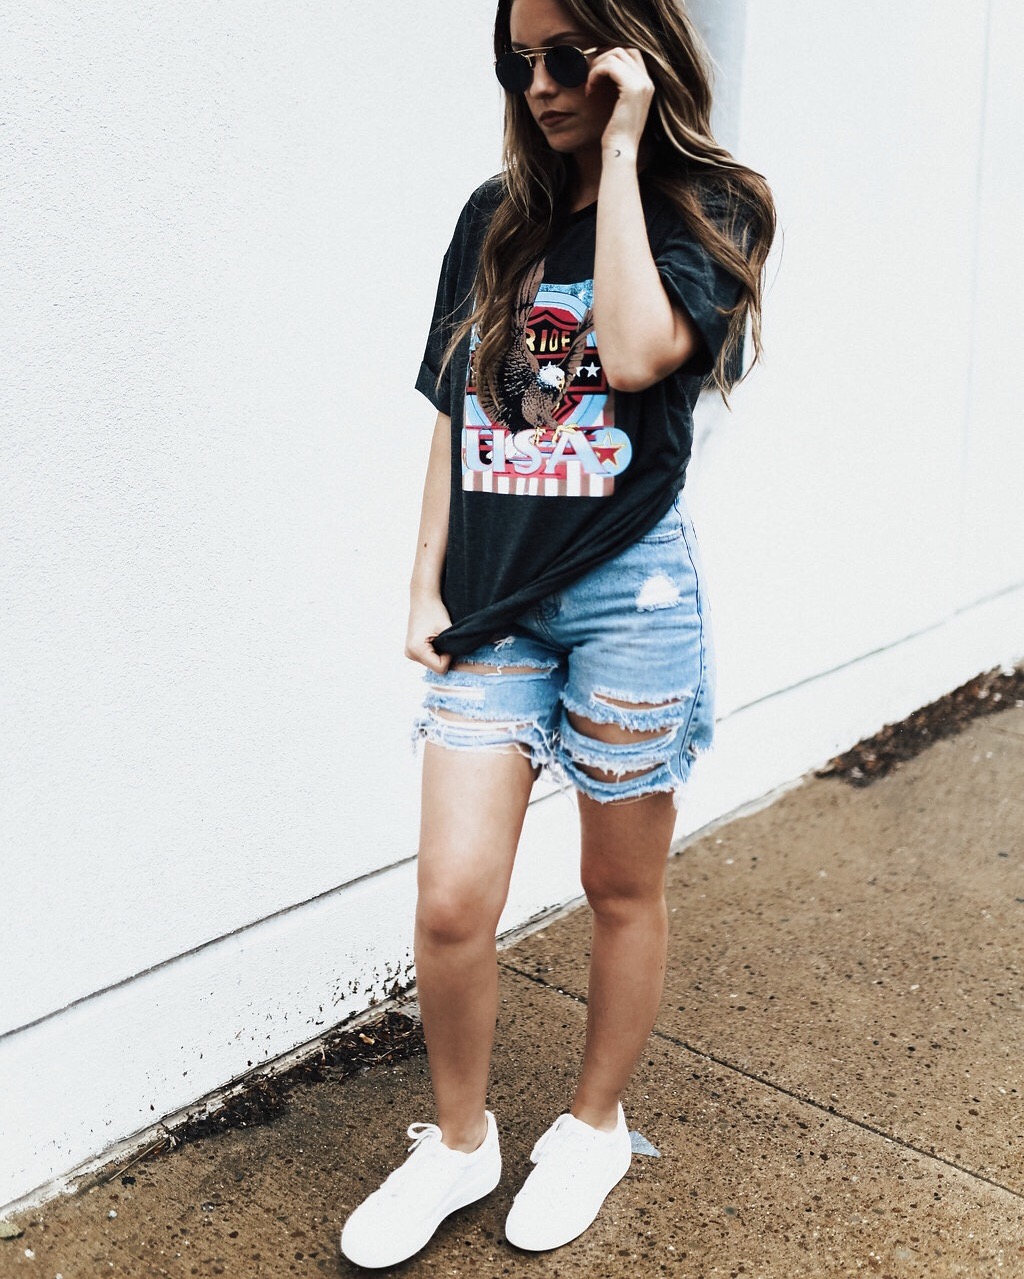 Long Shorts Are The New Short Shorts + Why I Quit Hair Extensions ...